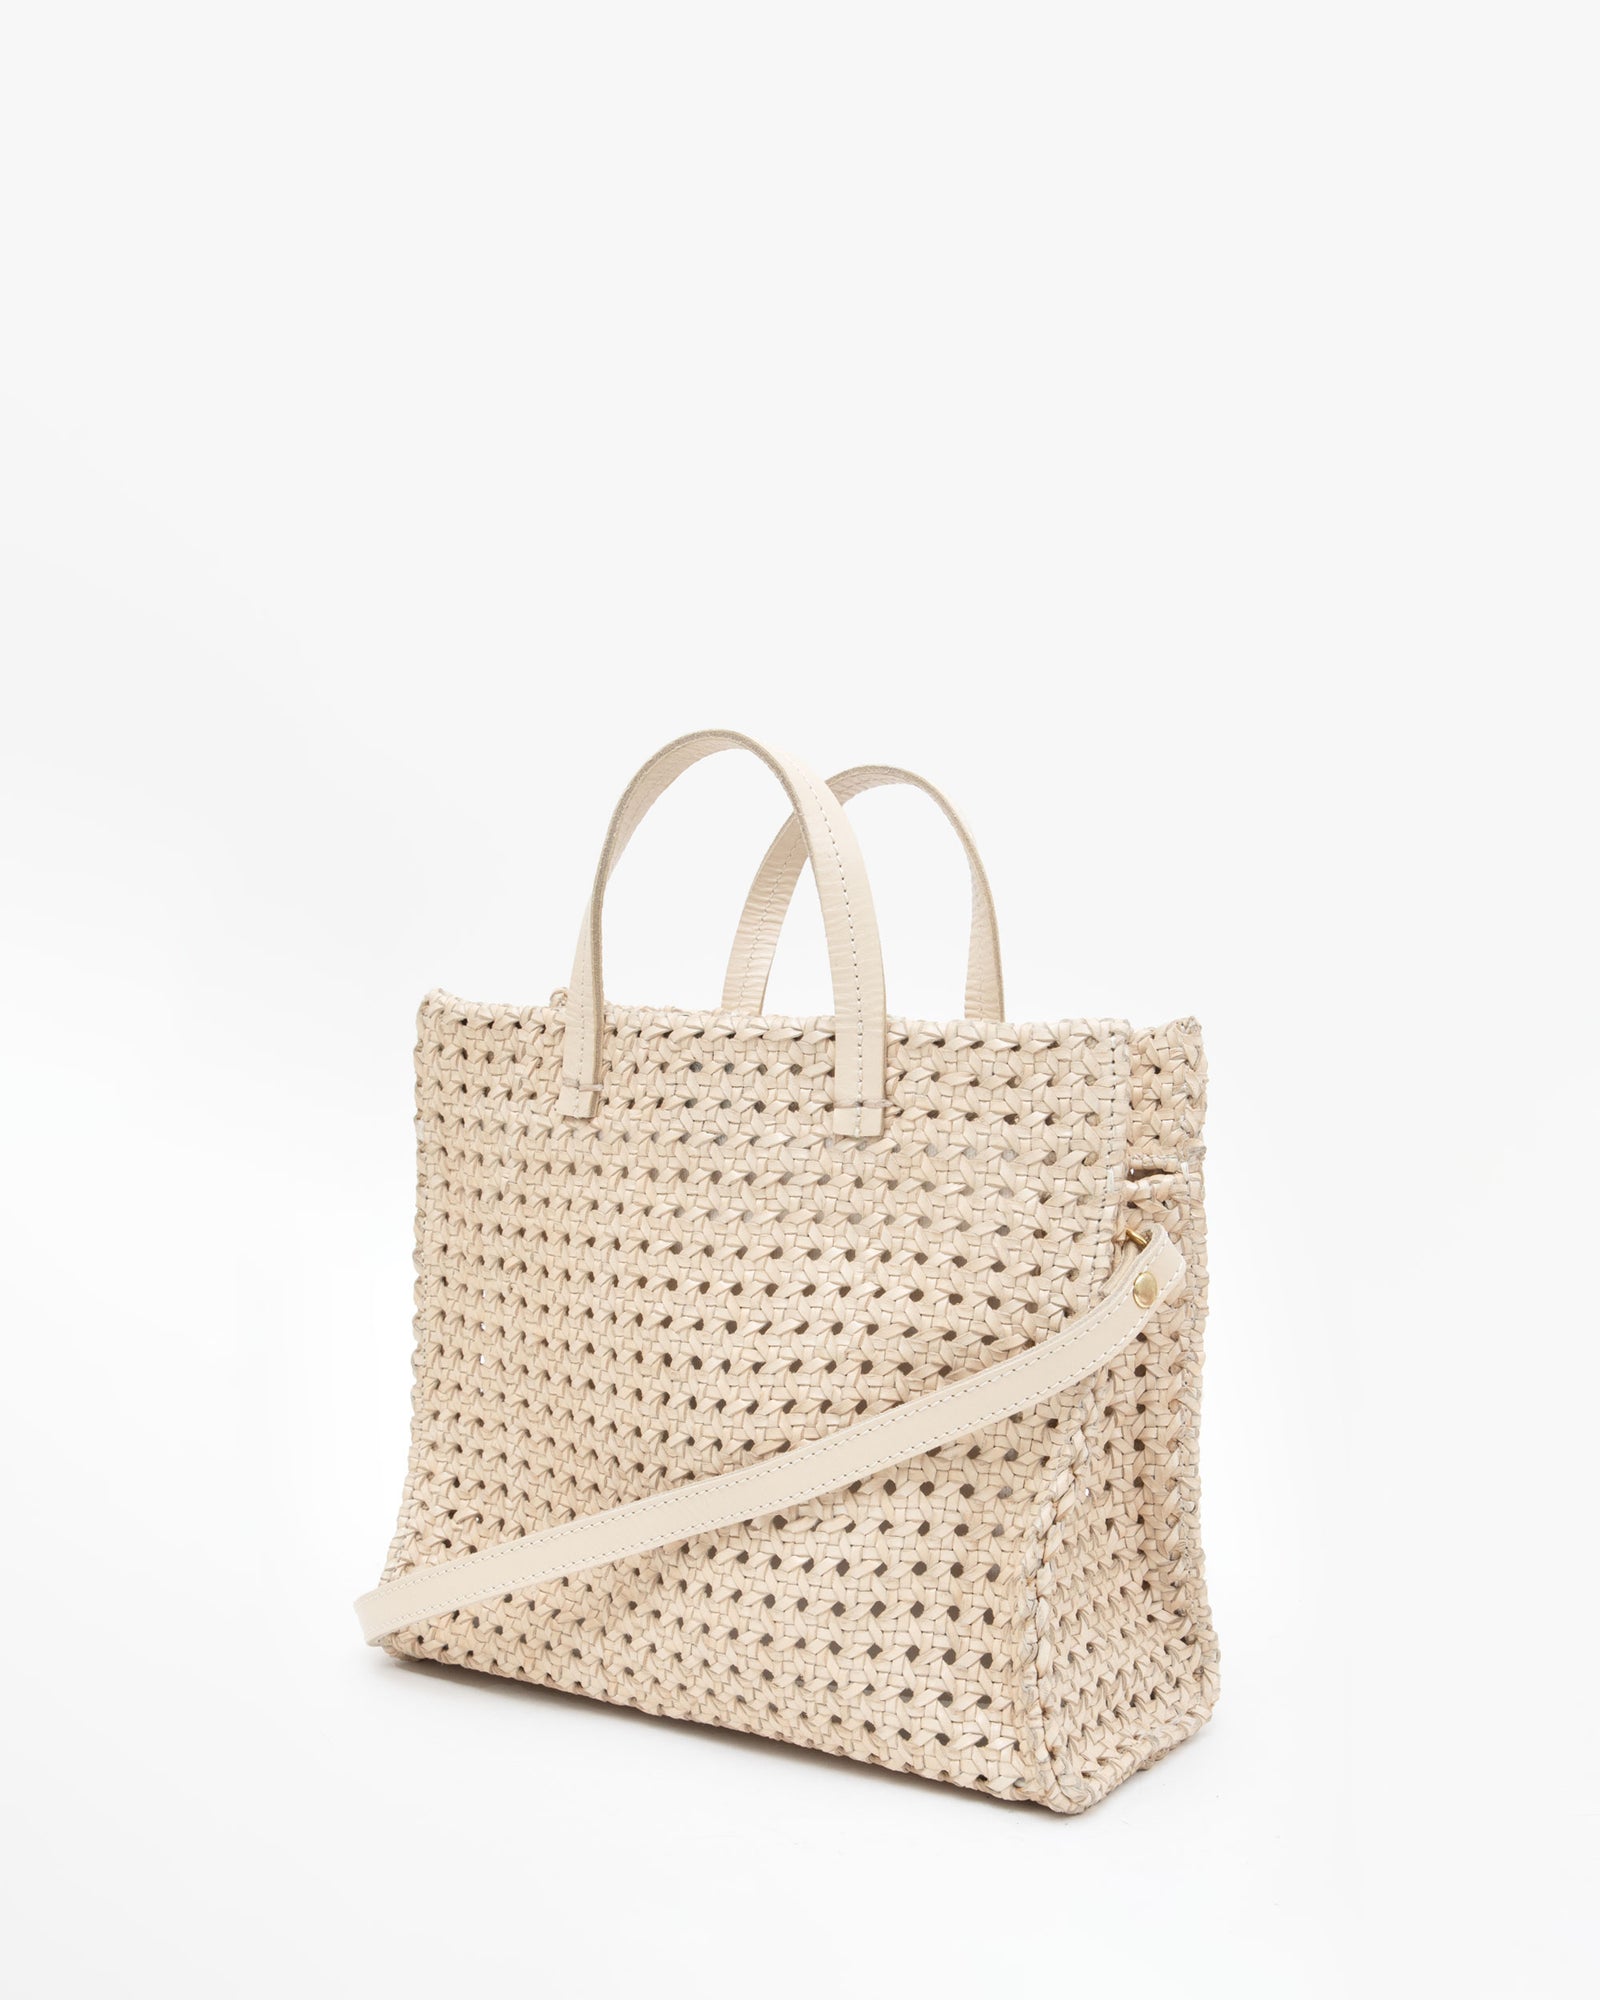 Clare V. Petit Summer Simple Tote - Size O/S